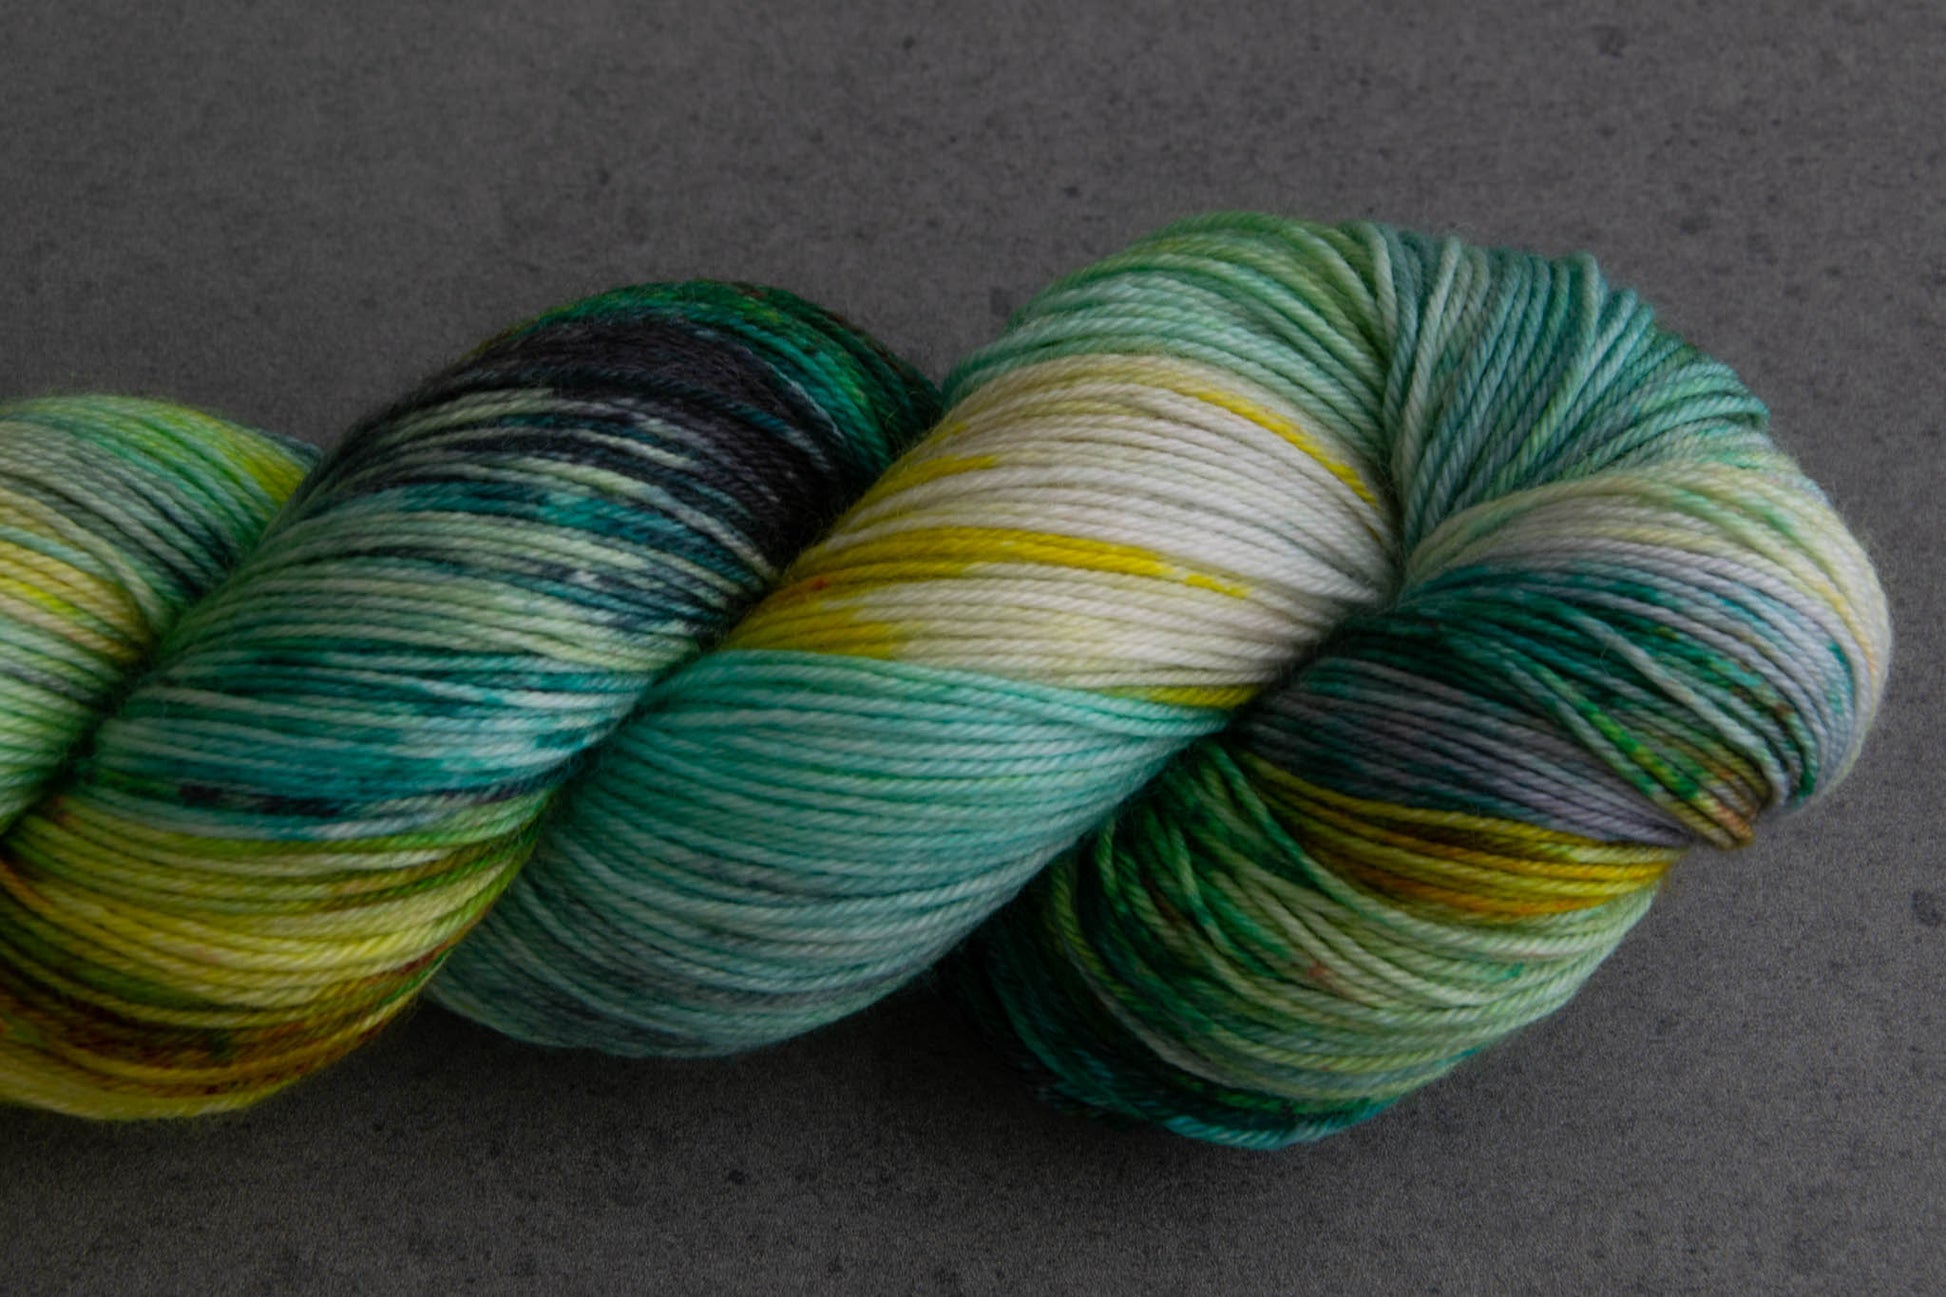 Closeup emphasizing the variegations in the skein, including sections of aqua, yellow, green, and gray.